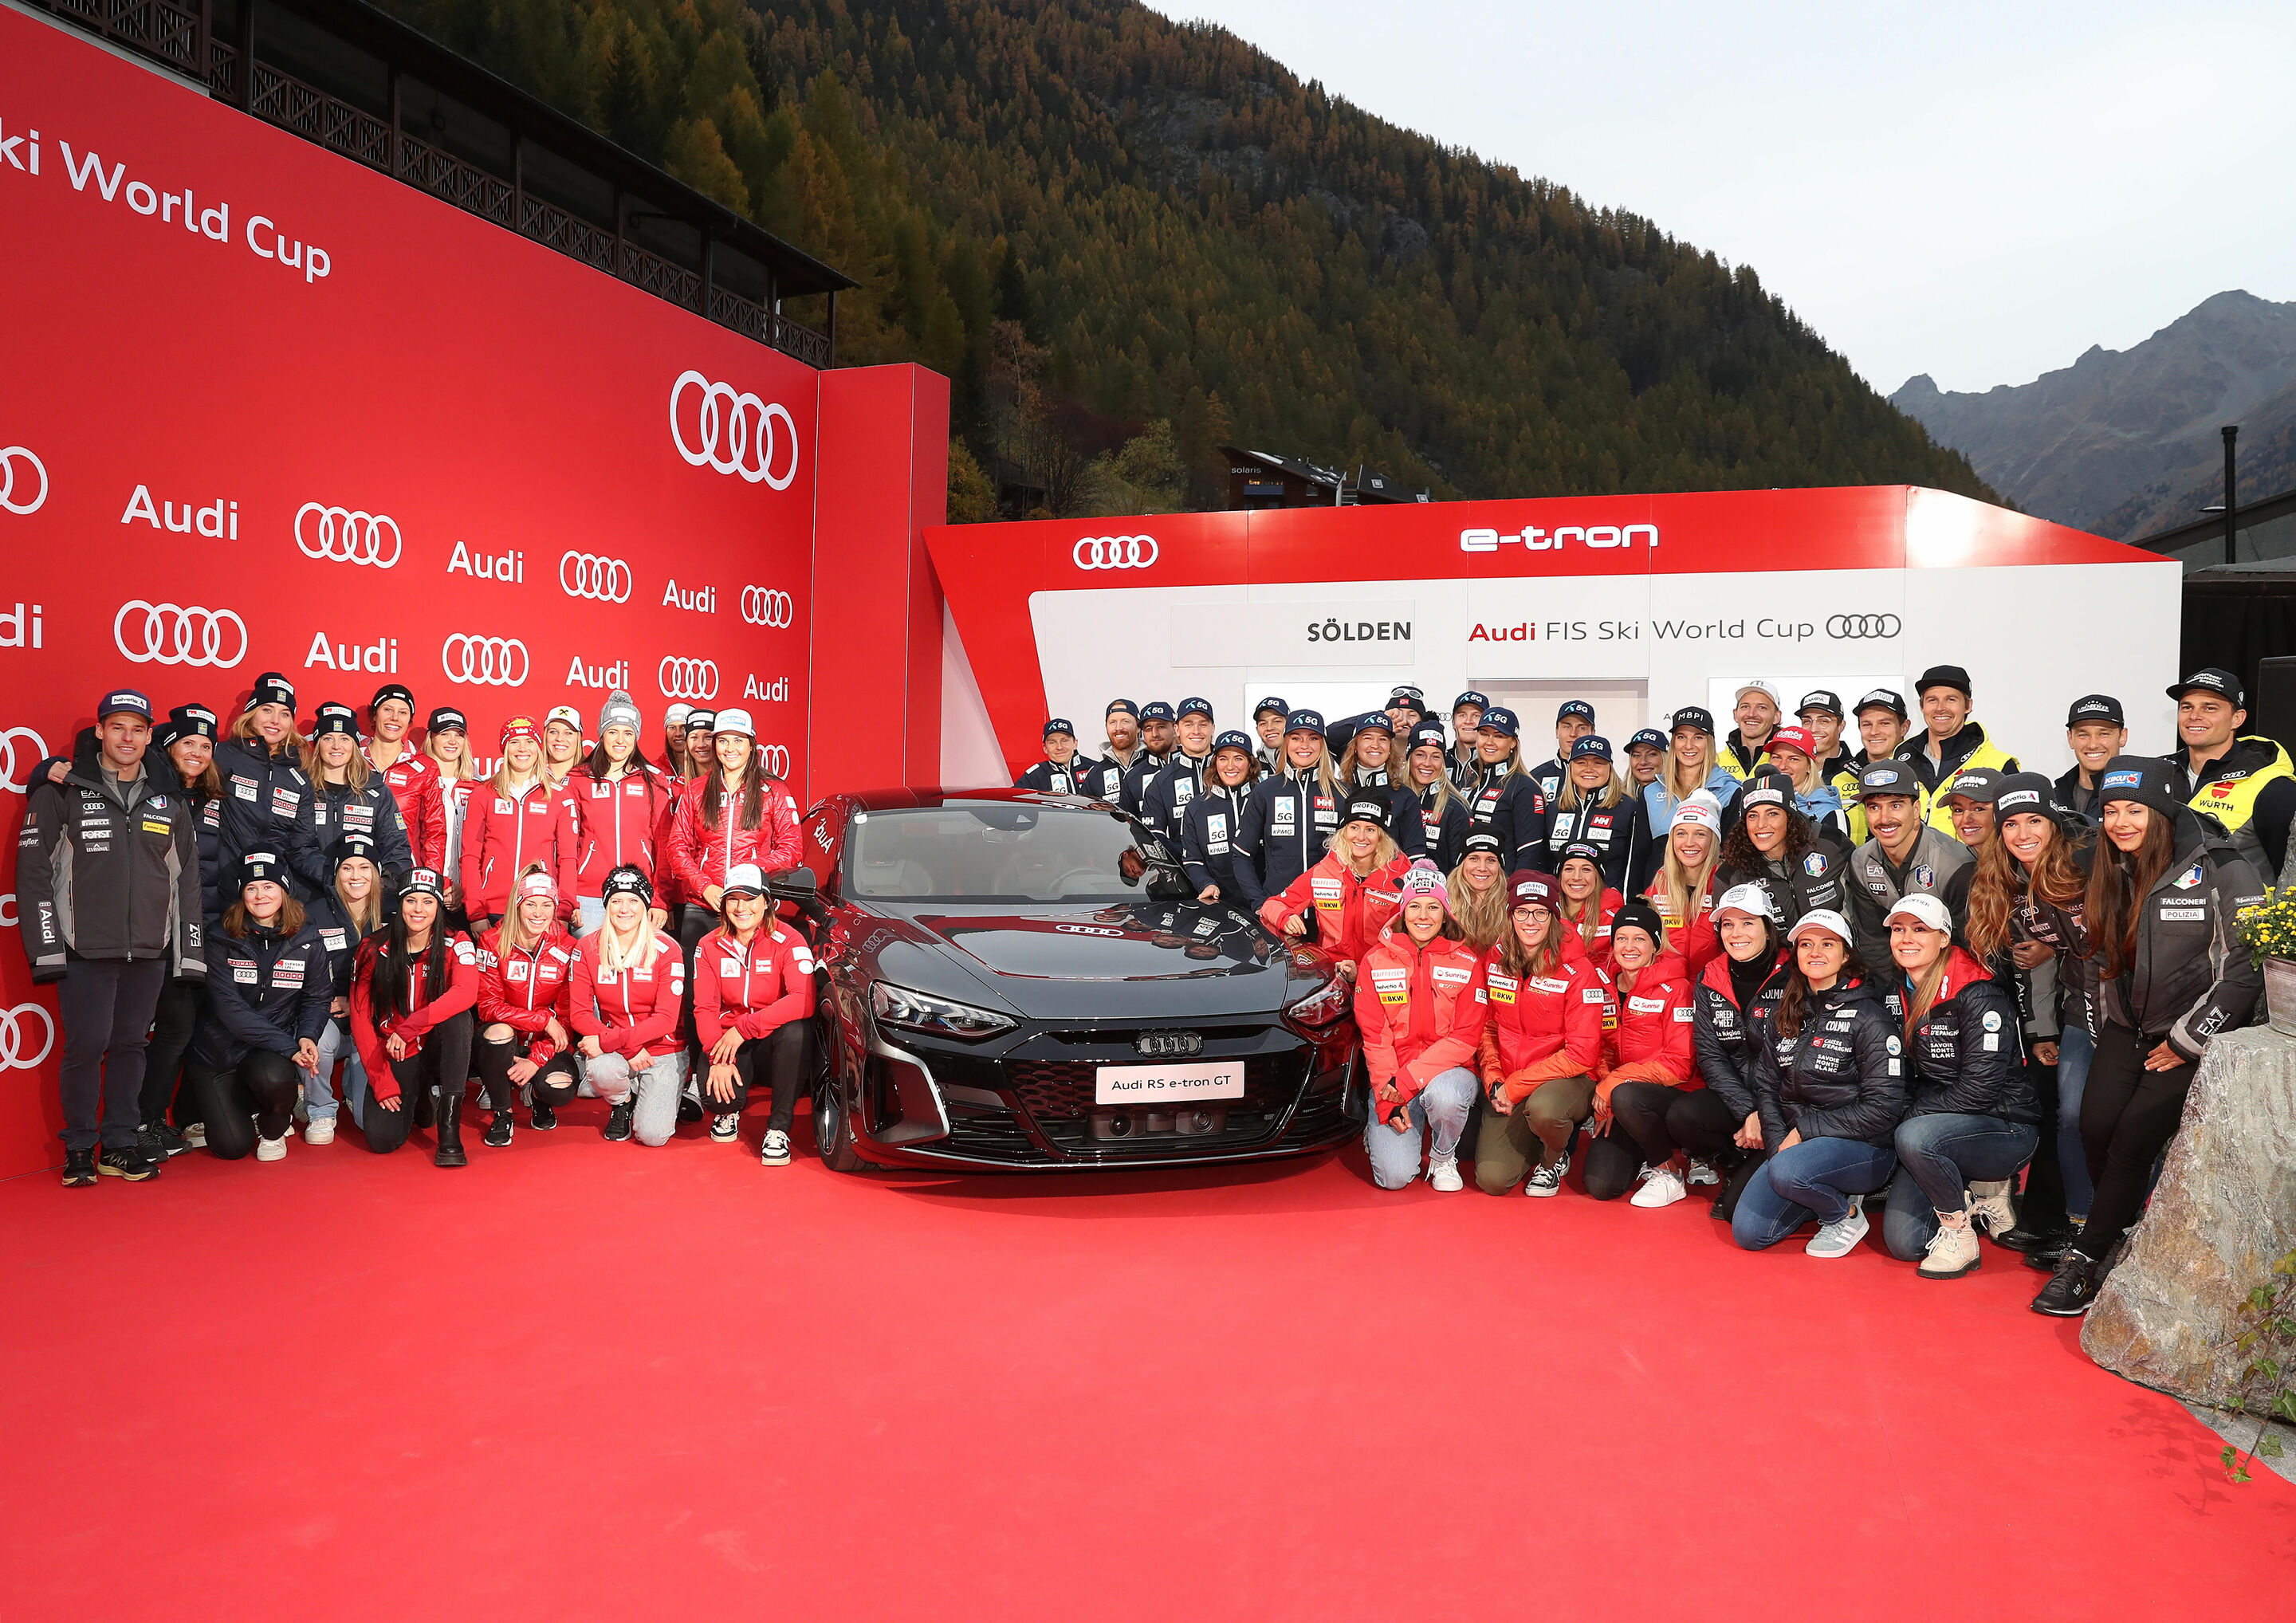 Partnership with FIS extended Audi to shape Alpine Ski World Cup for four more years Audi MediaCenter